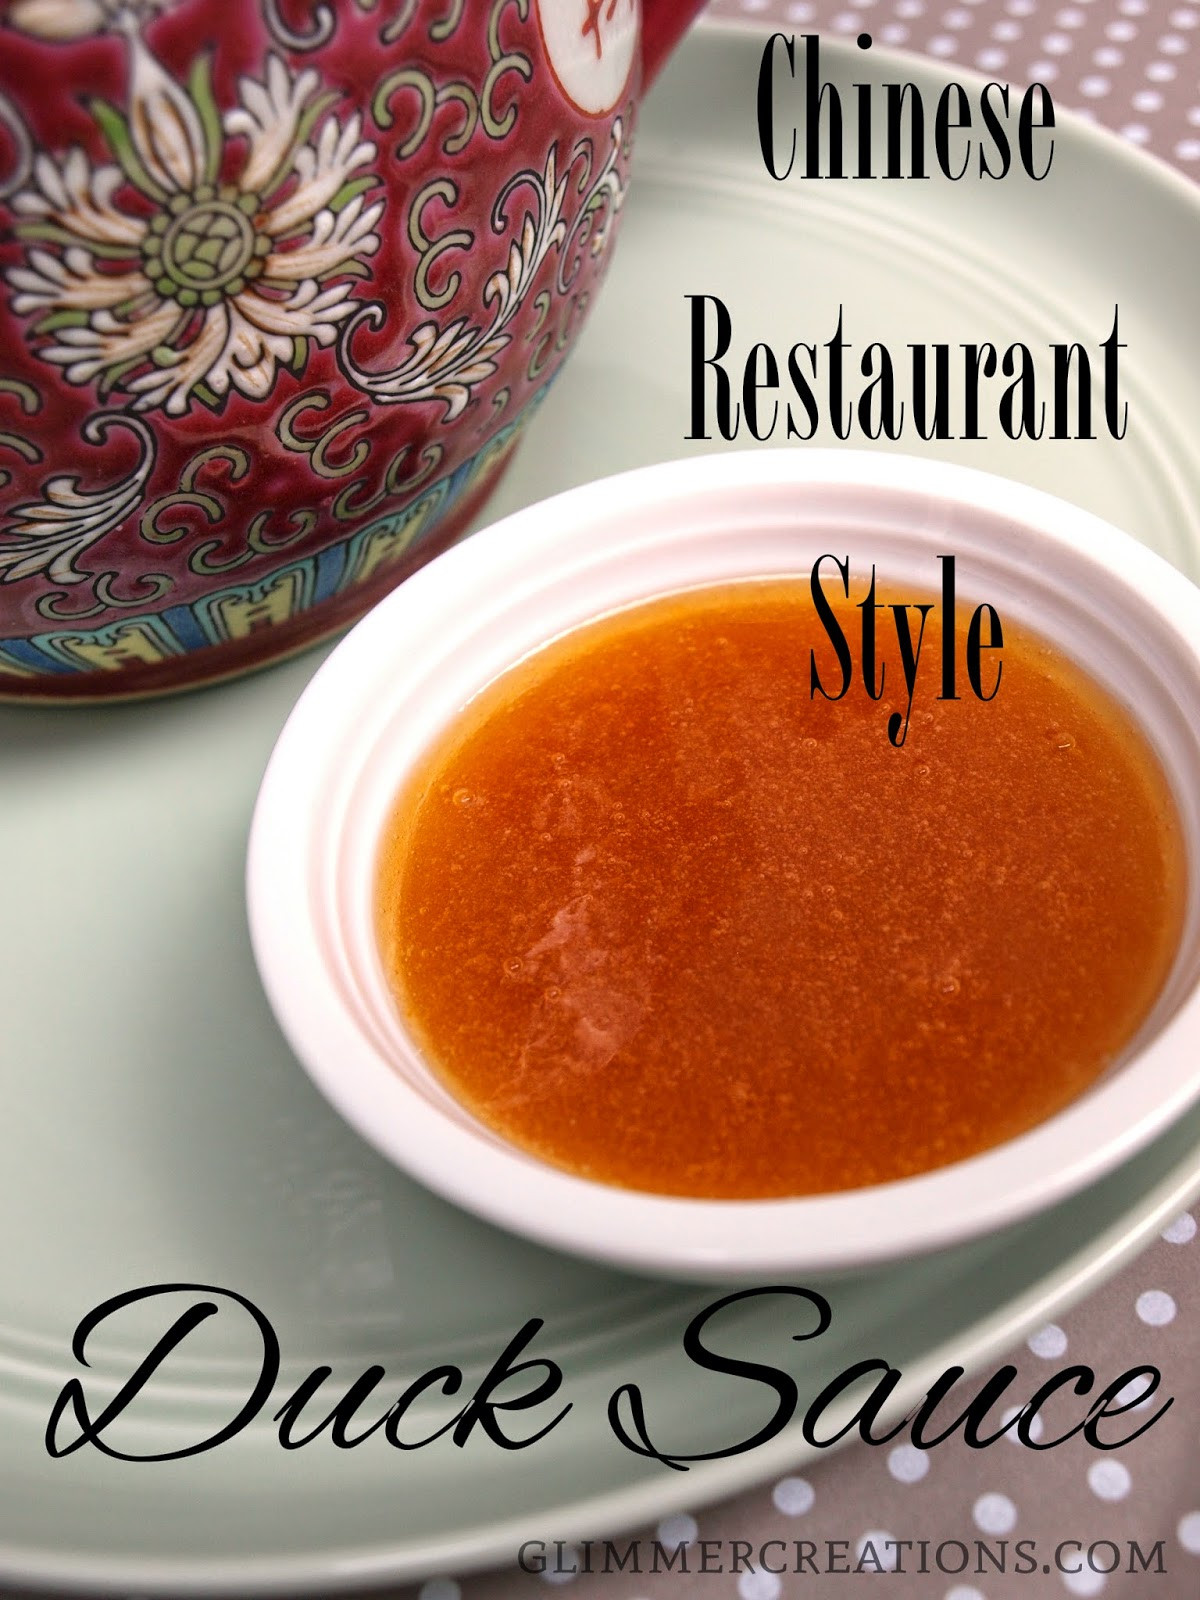 Chinese Restaurants Recipes
 Glimmer Creations Chinese Restaurant Style Duck Sauce Recipe